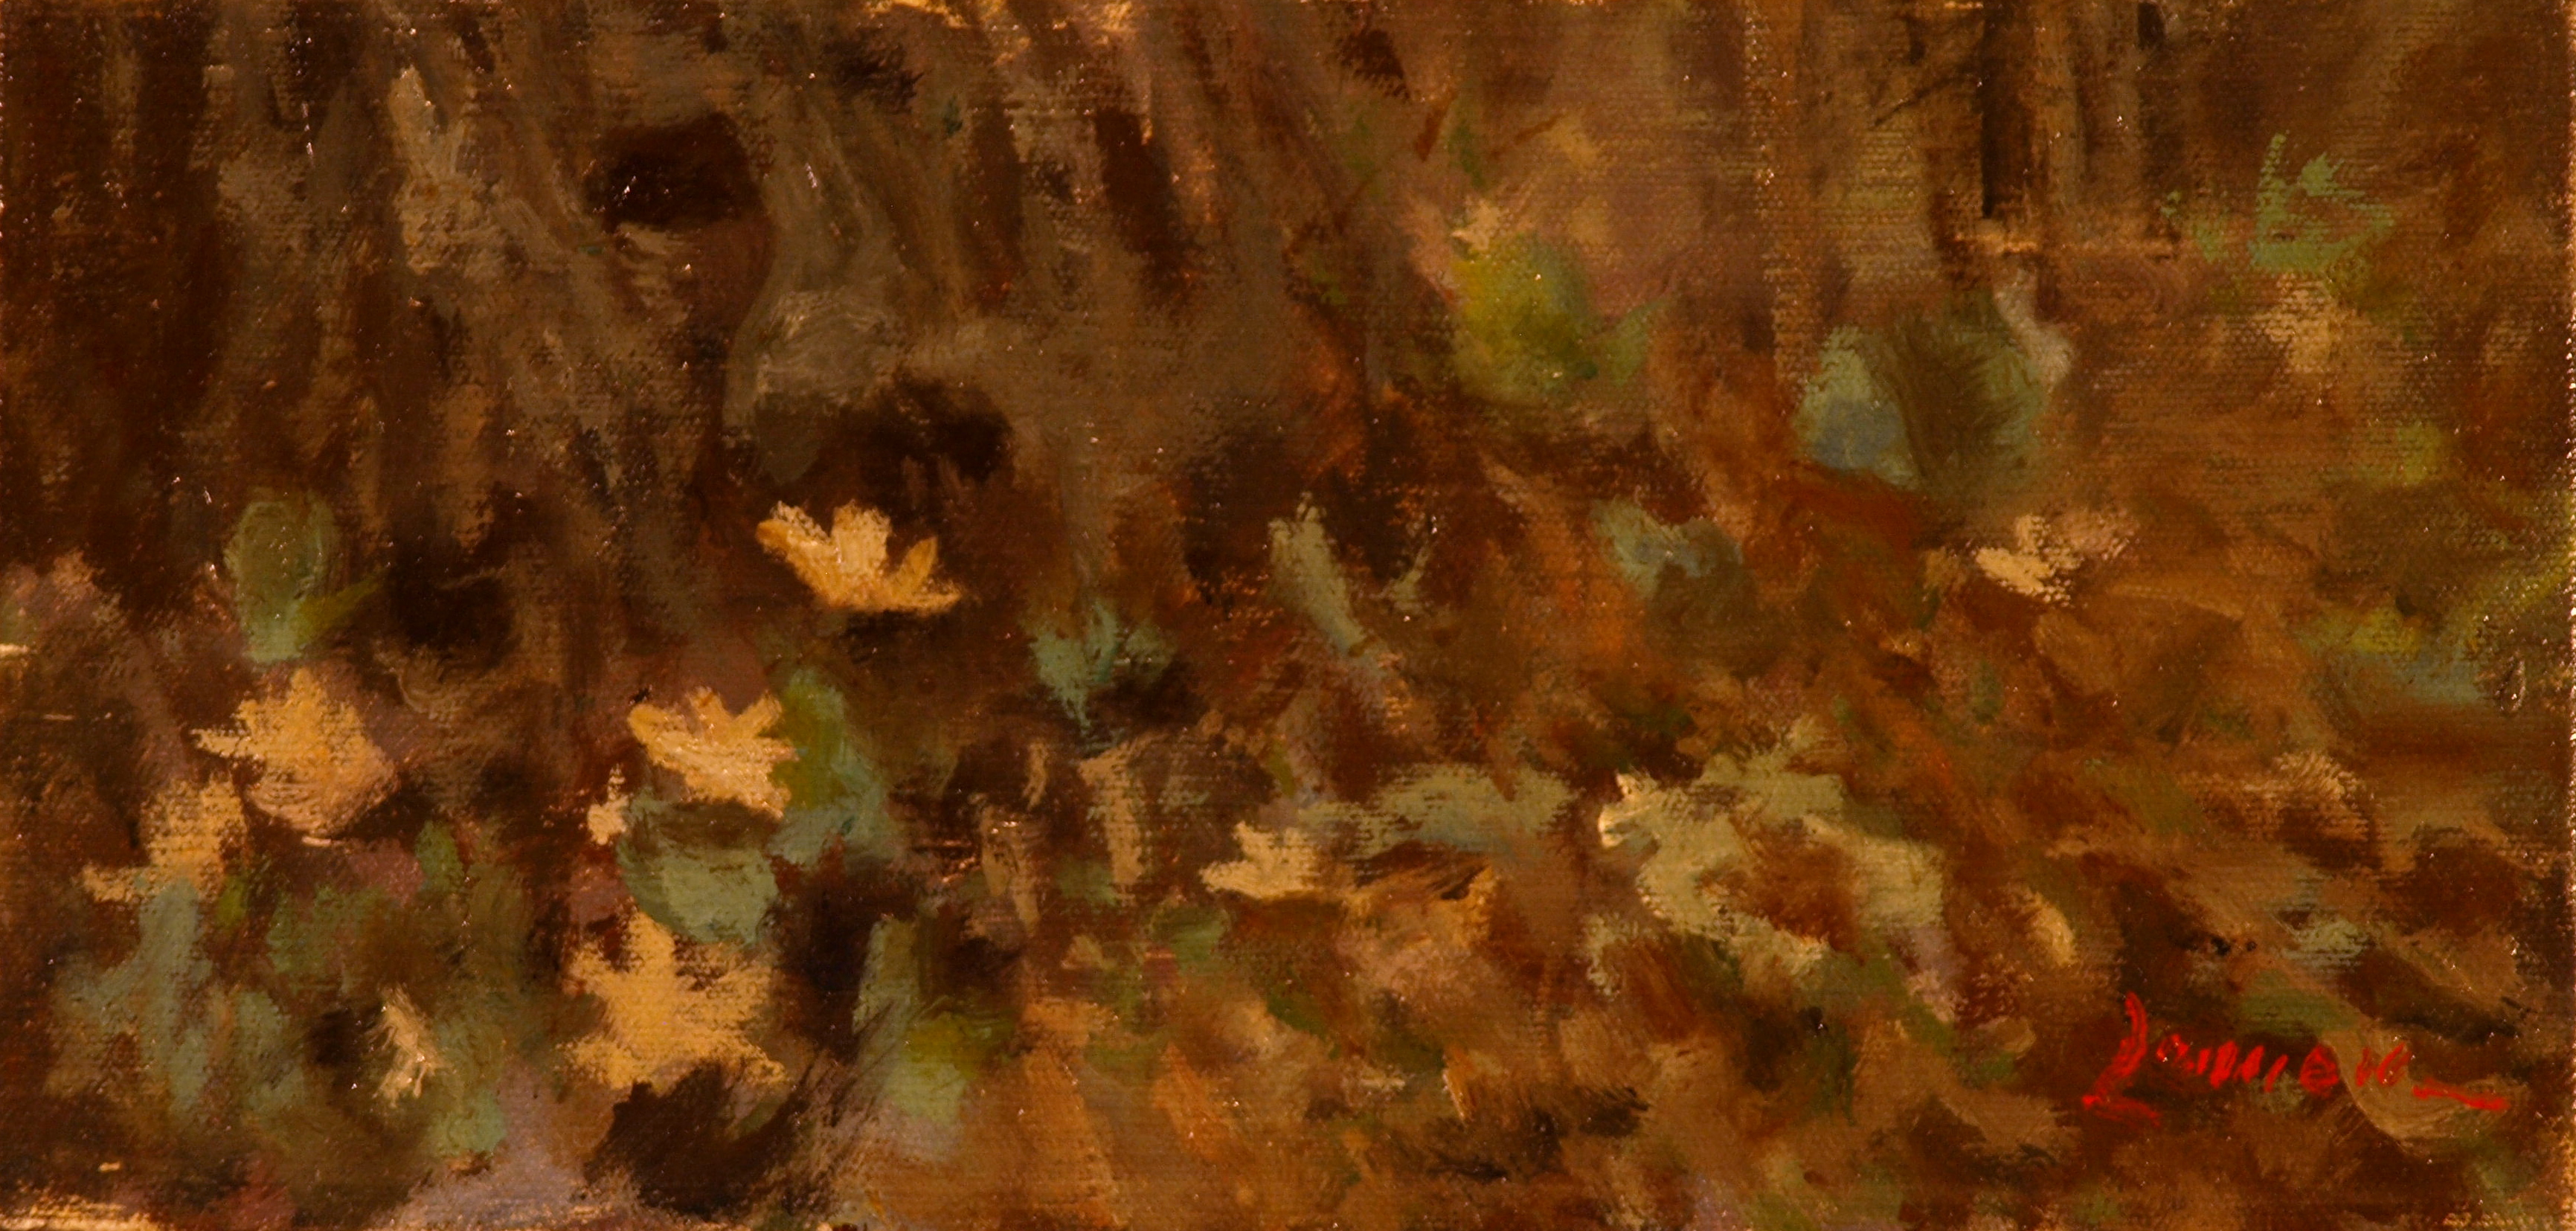 Bloodroot, Oil on Panel, 6 x 12 Inches, by Bernard Lennon, $400